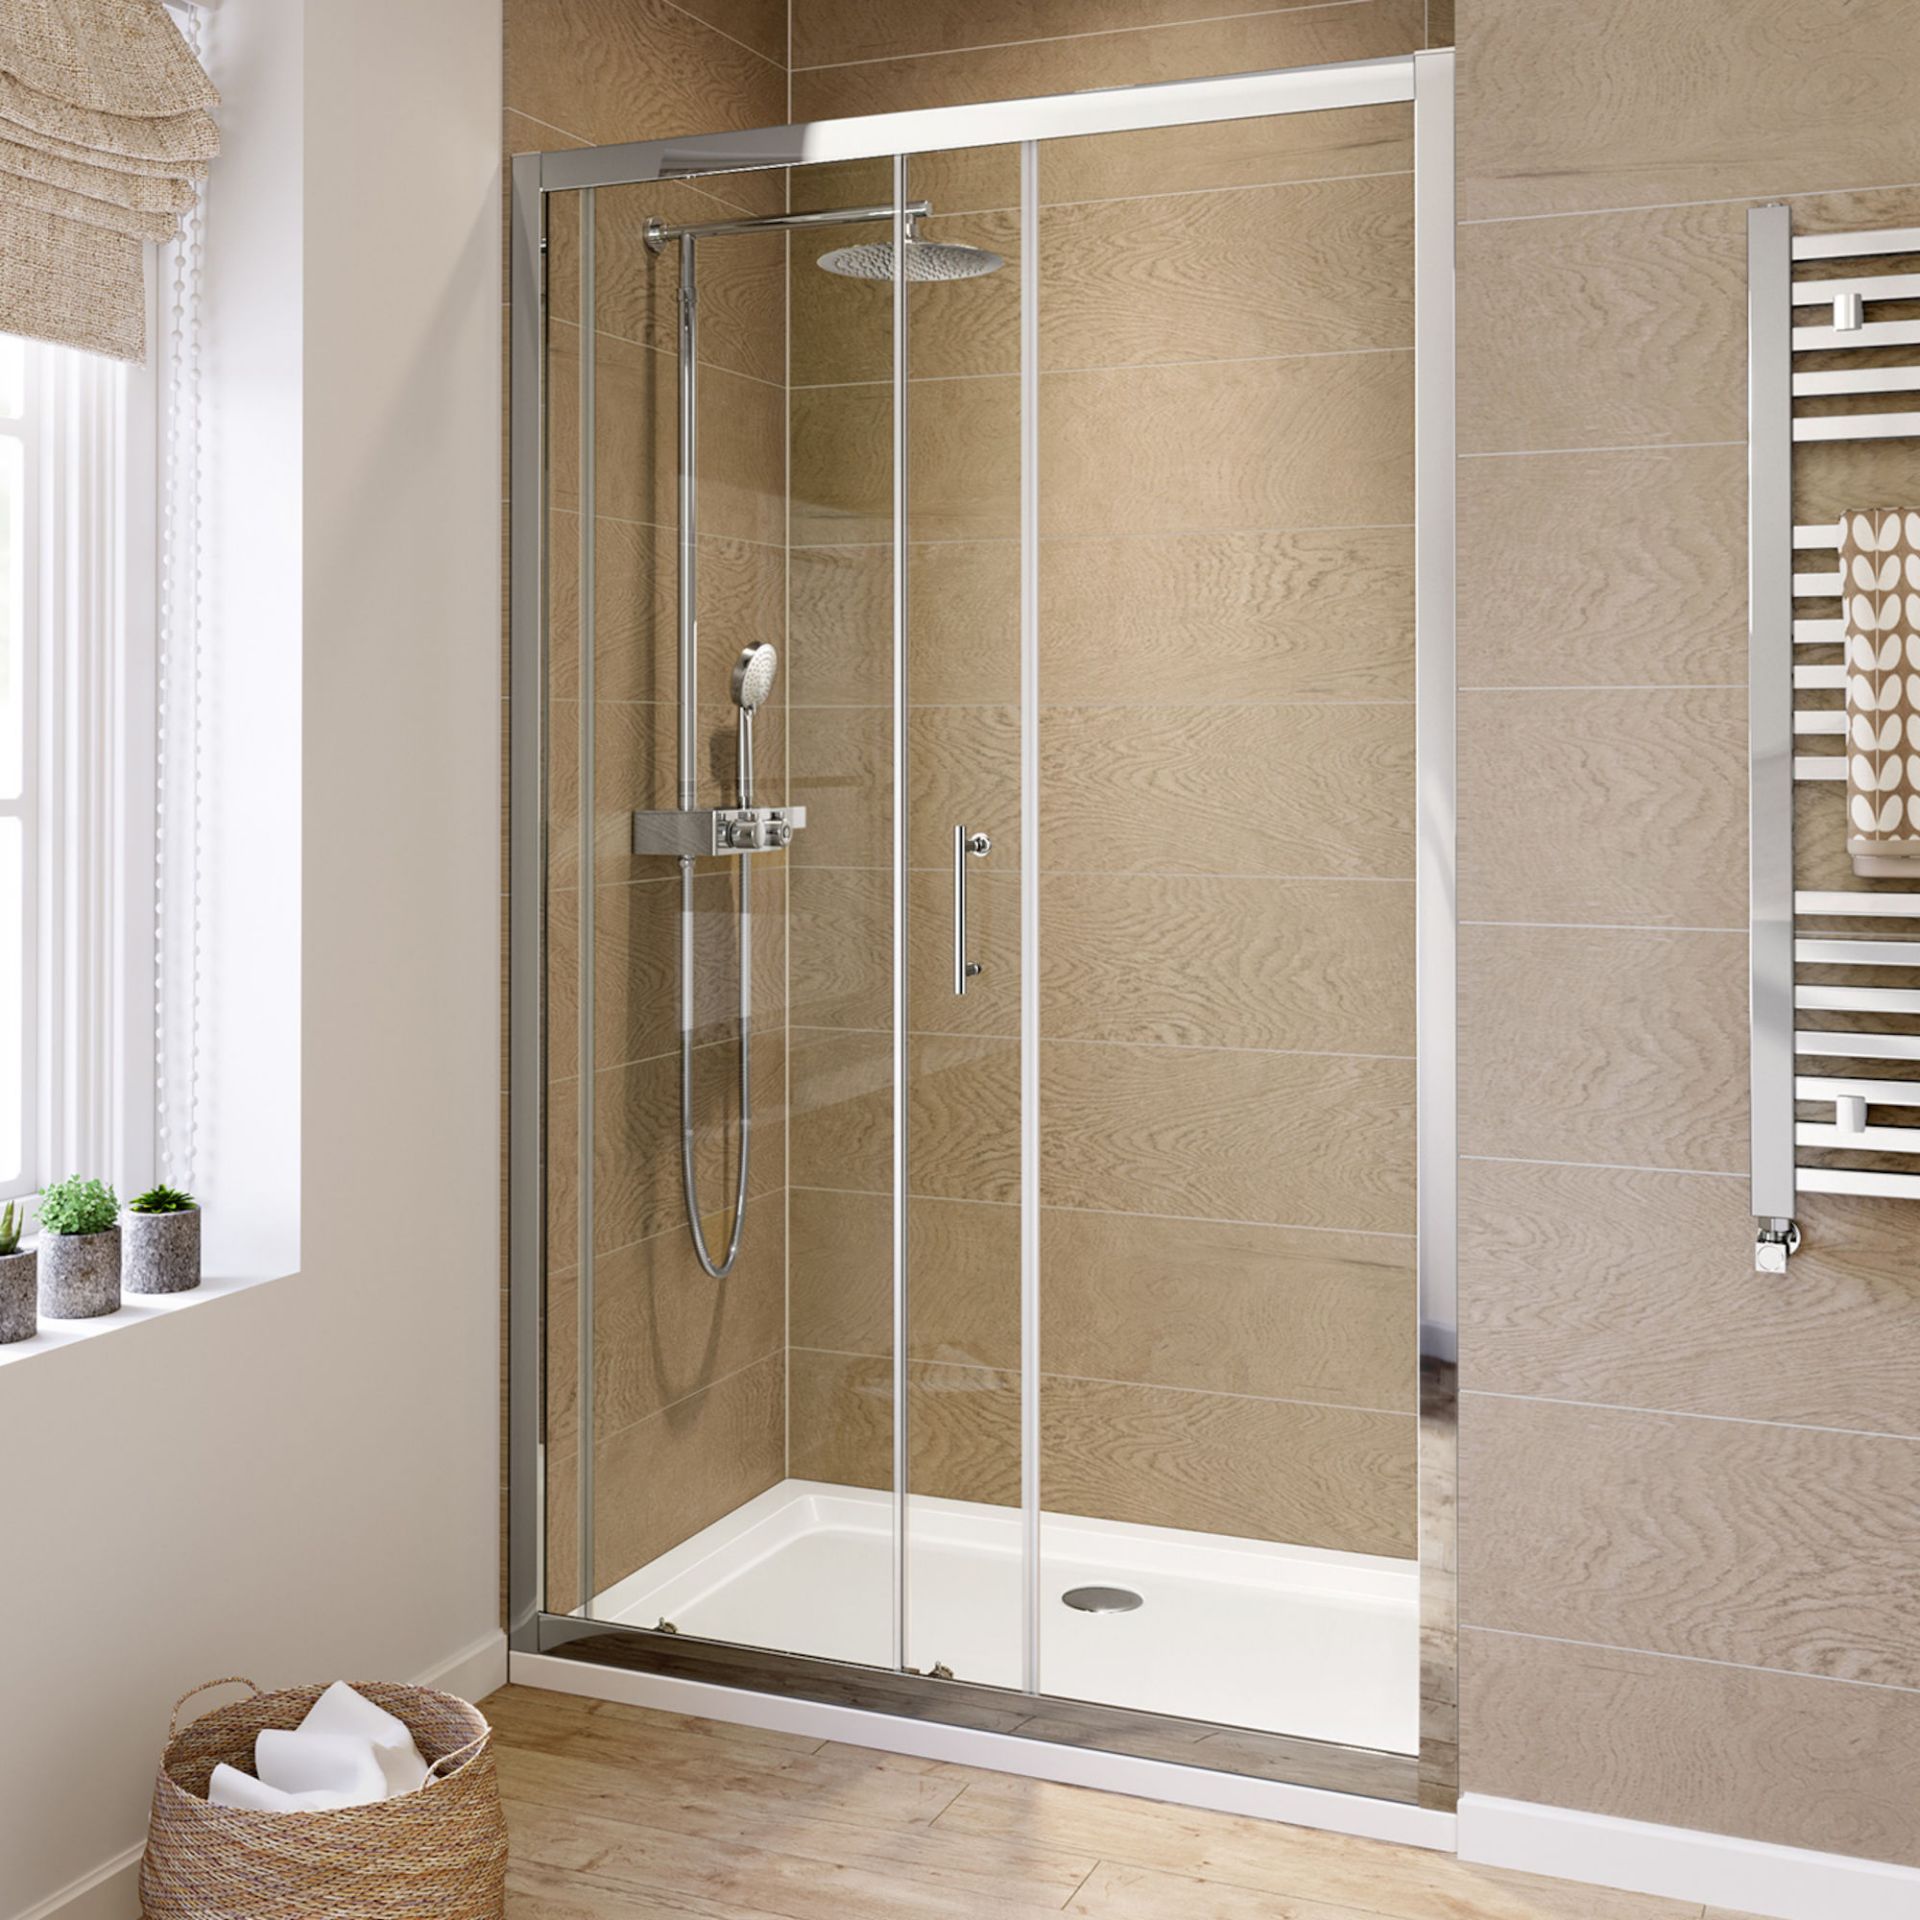 New Twyfords 1100mm - 6mm - Elements Sliding Shower Door. RRP £299.99. 6mm Safety Glass Fully...